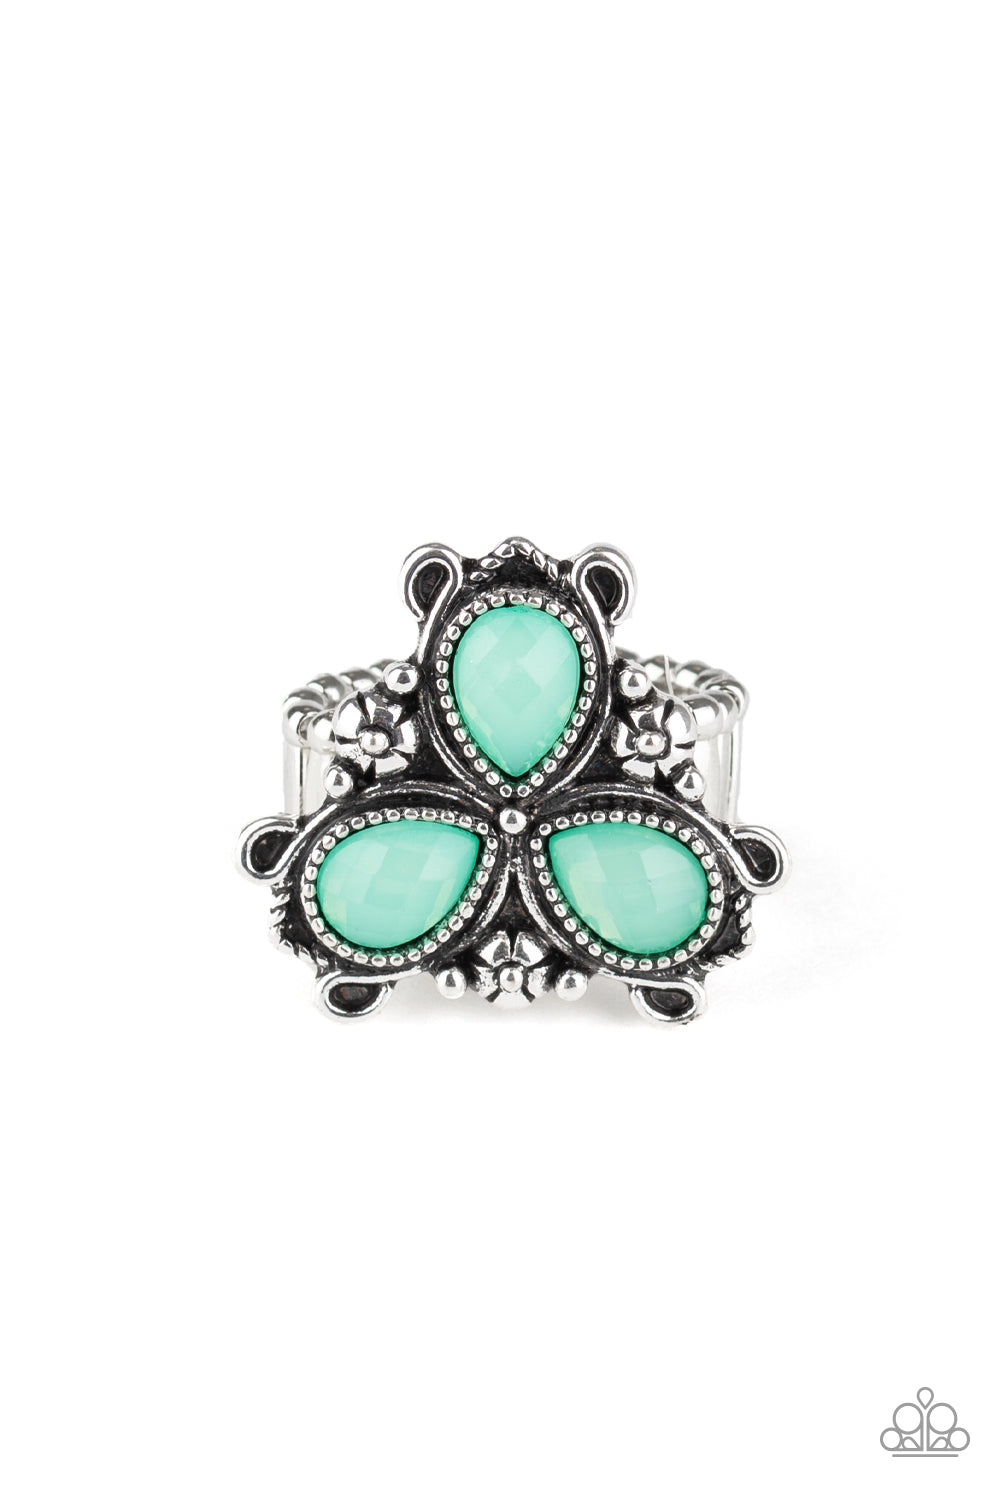 Ambrosial Garden - Green and Silver Ring - Paparazzi Accessories - Bordered by dainty silver flowers, three dewy green teardrop beads coalesce into an ethereal centerpiece atop the finger. Features a stretchy band for a flexible fit. Sold as one individual ring.